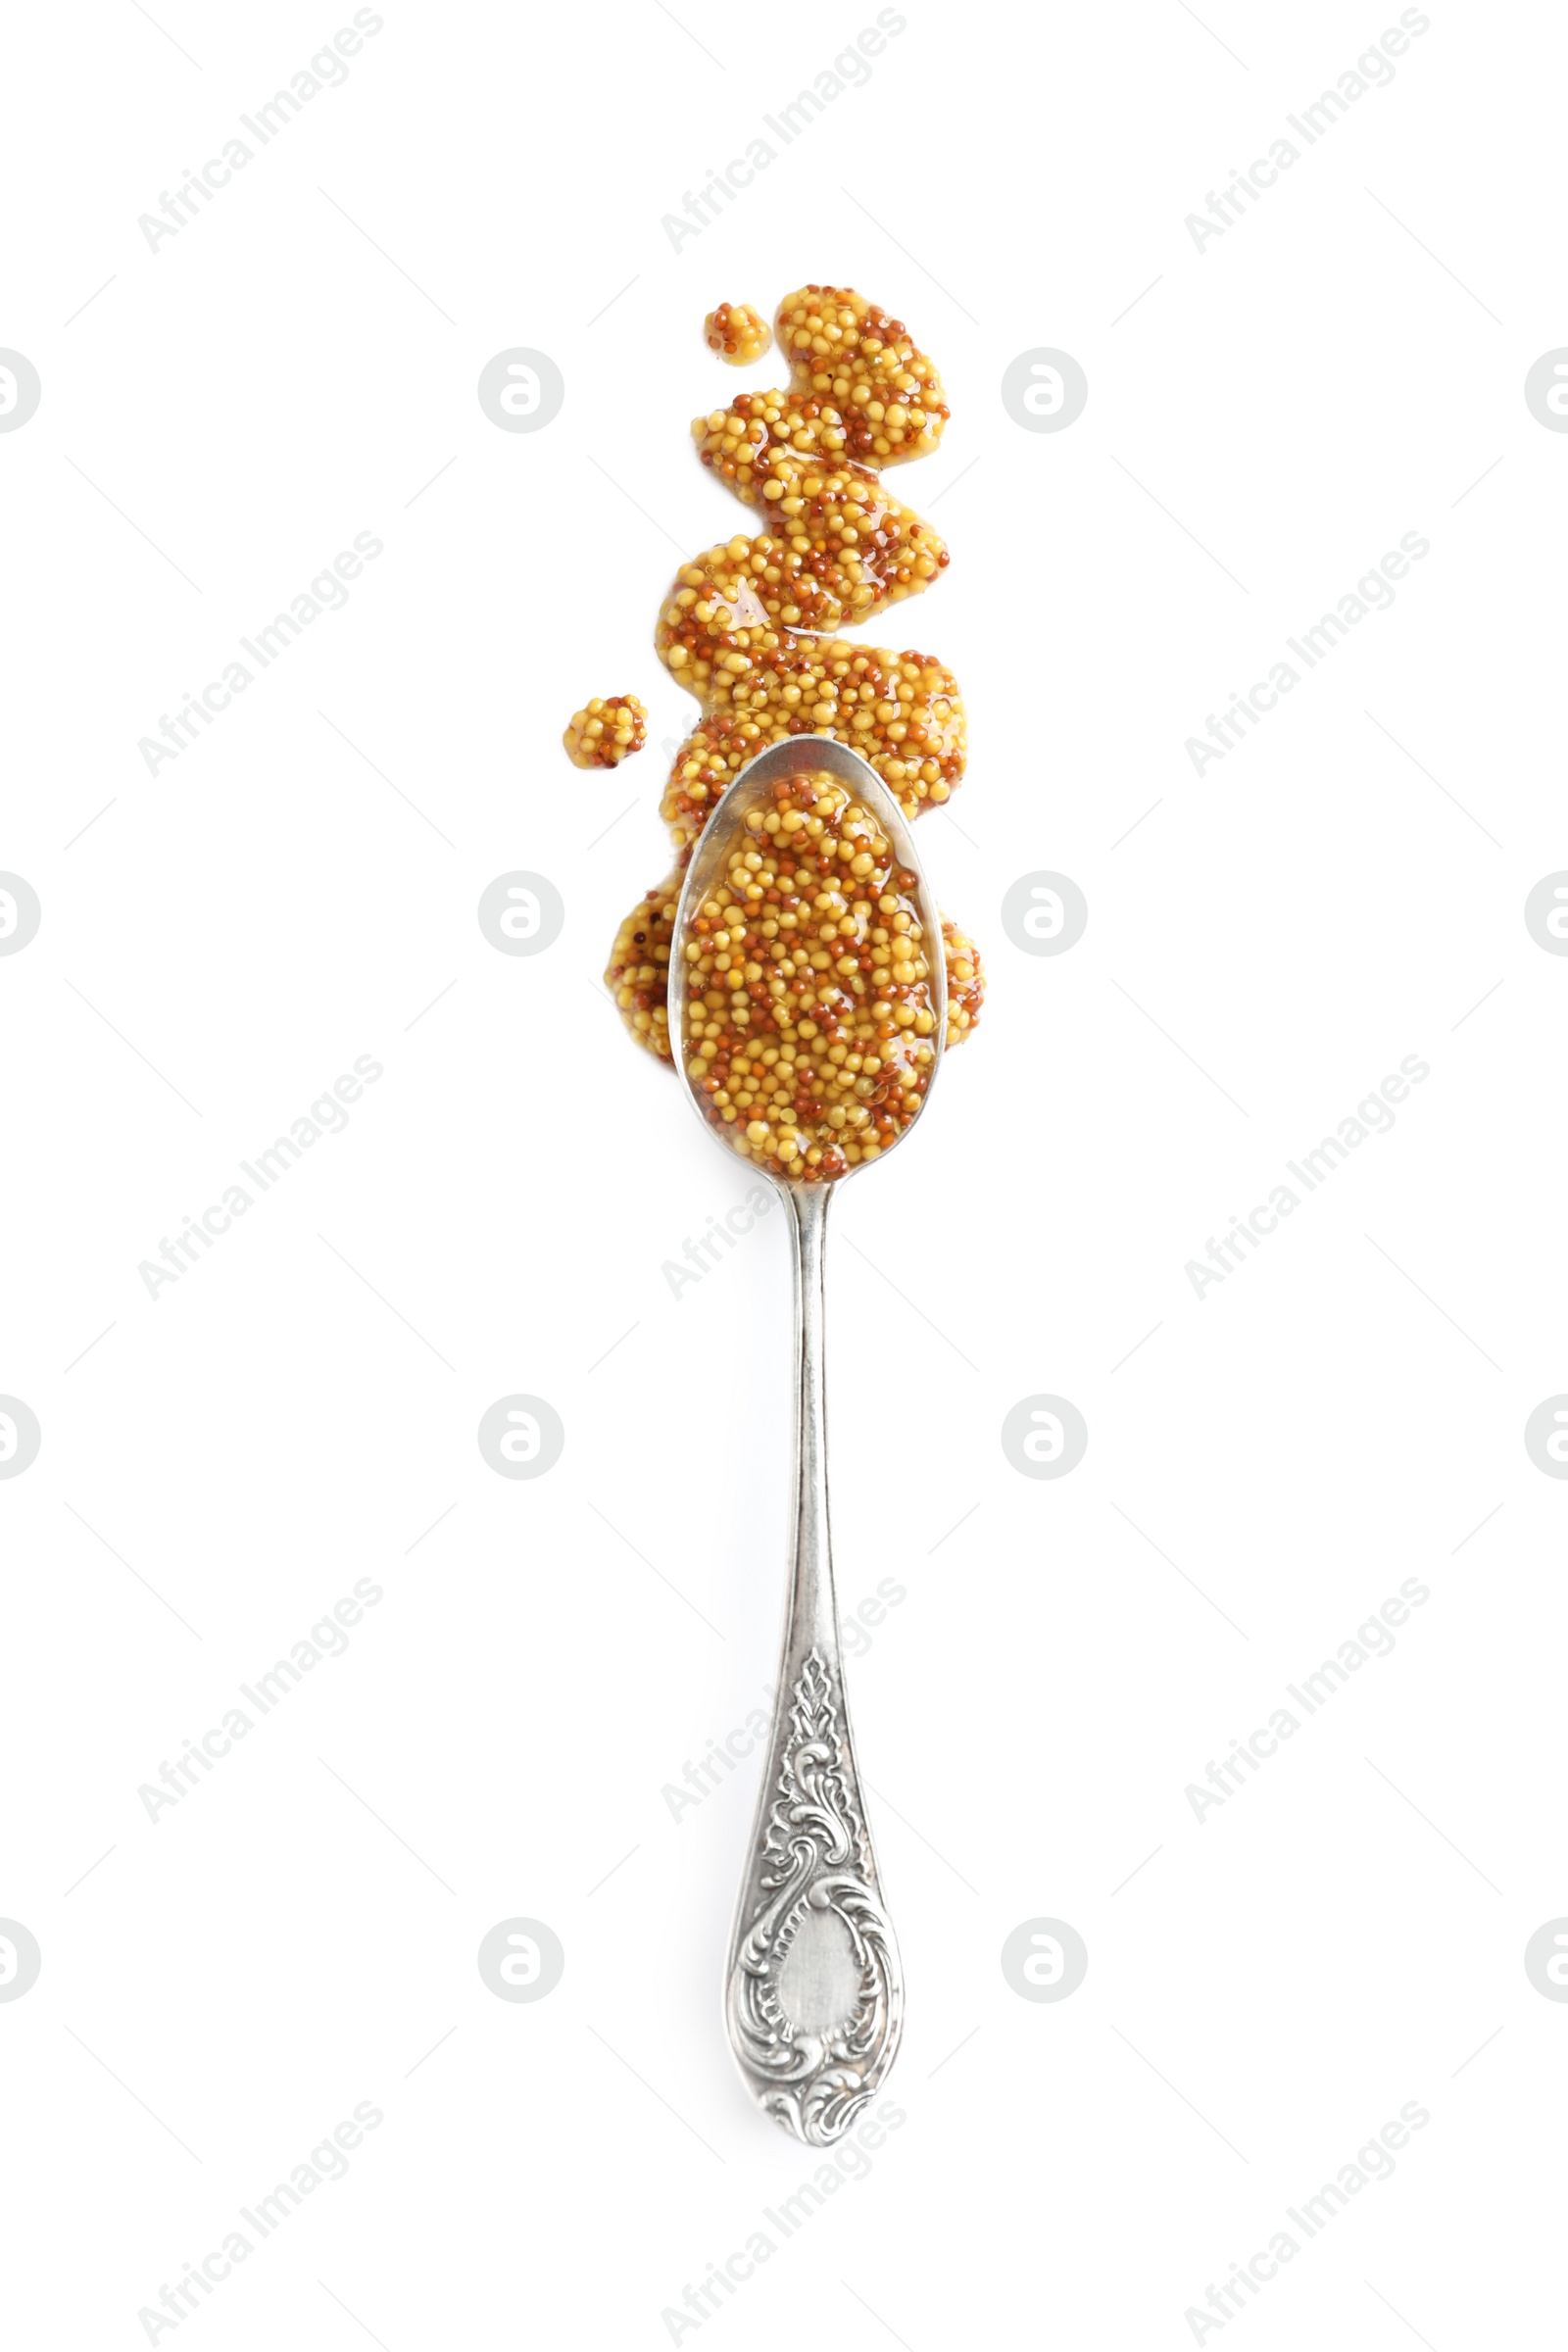 Photo of Delicious mustard beans and spoon on white background, top view. Spicy sauce